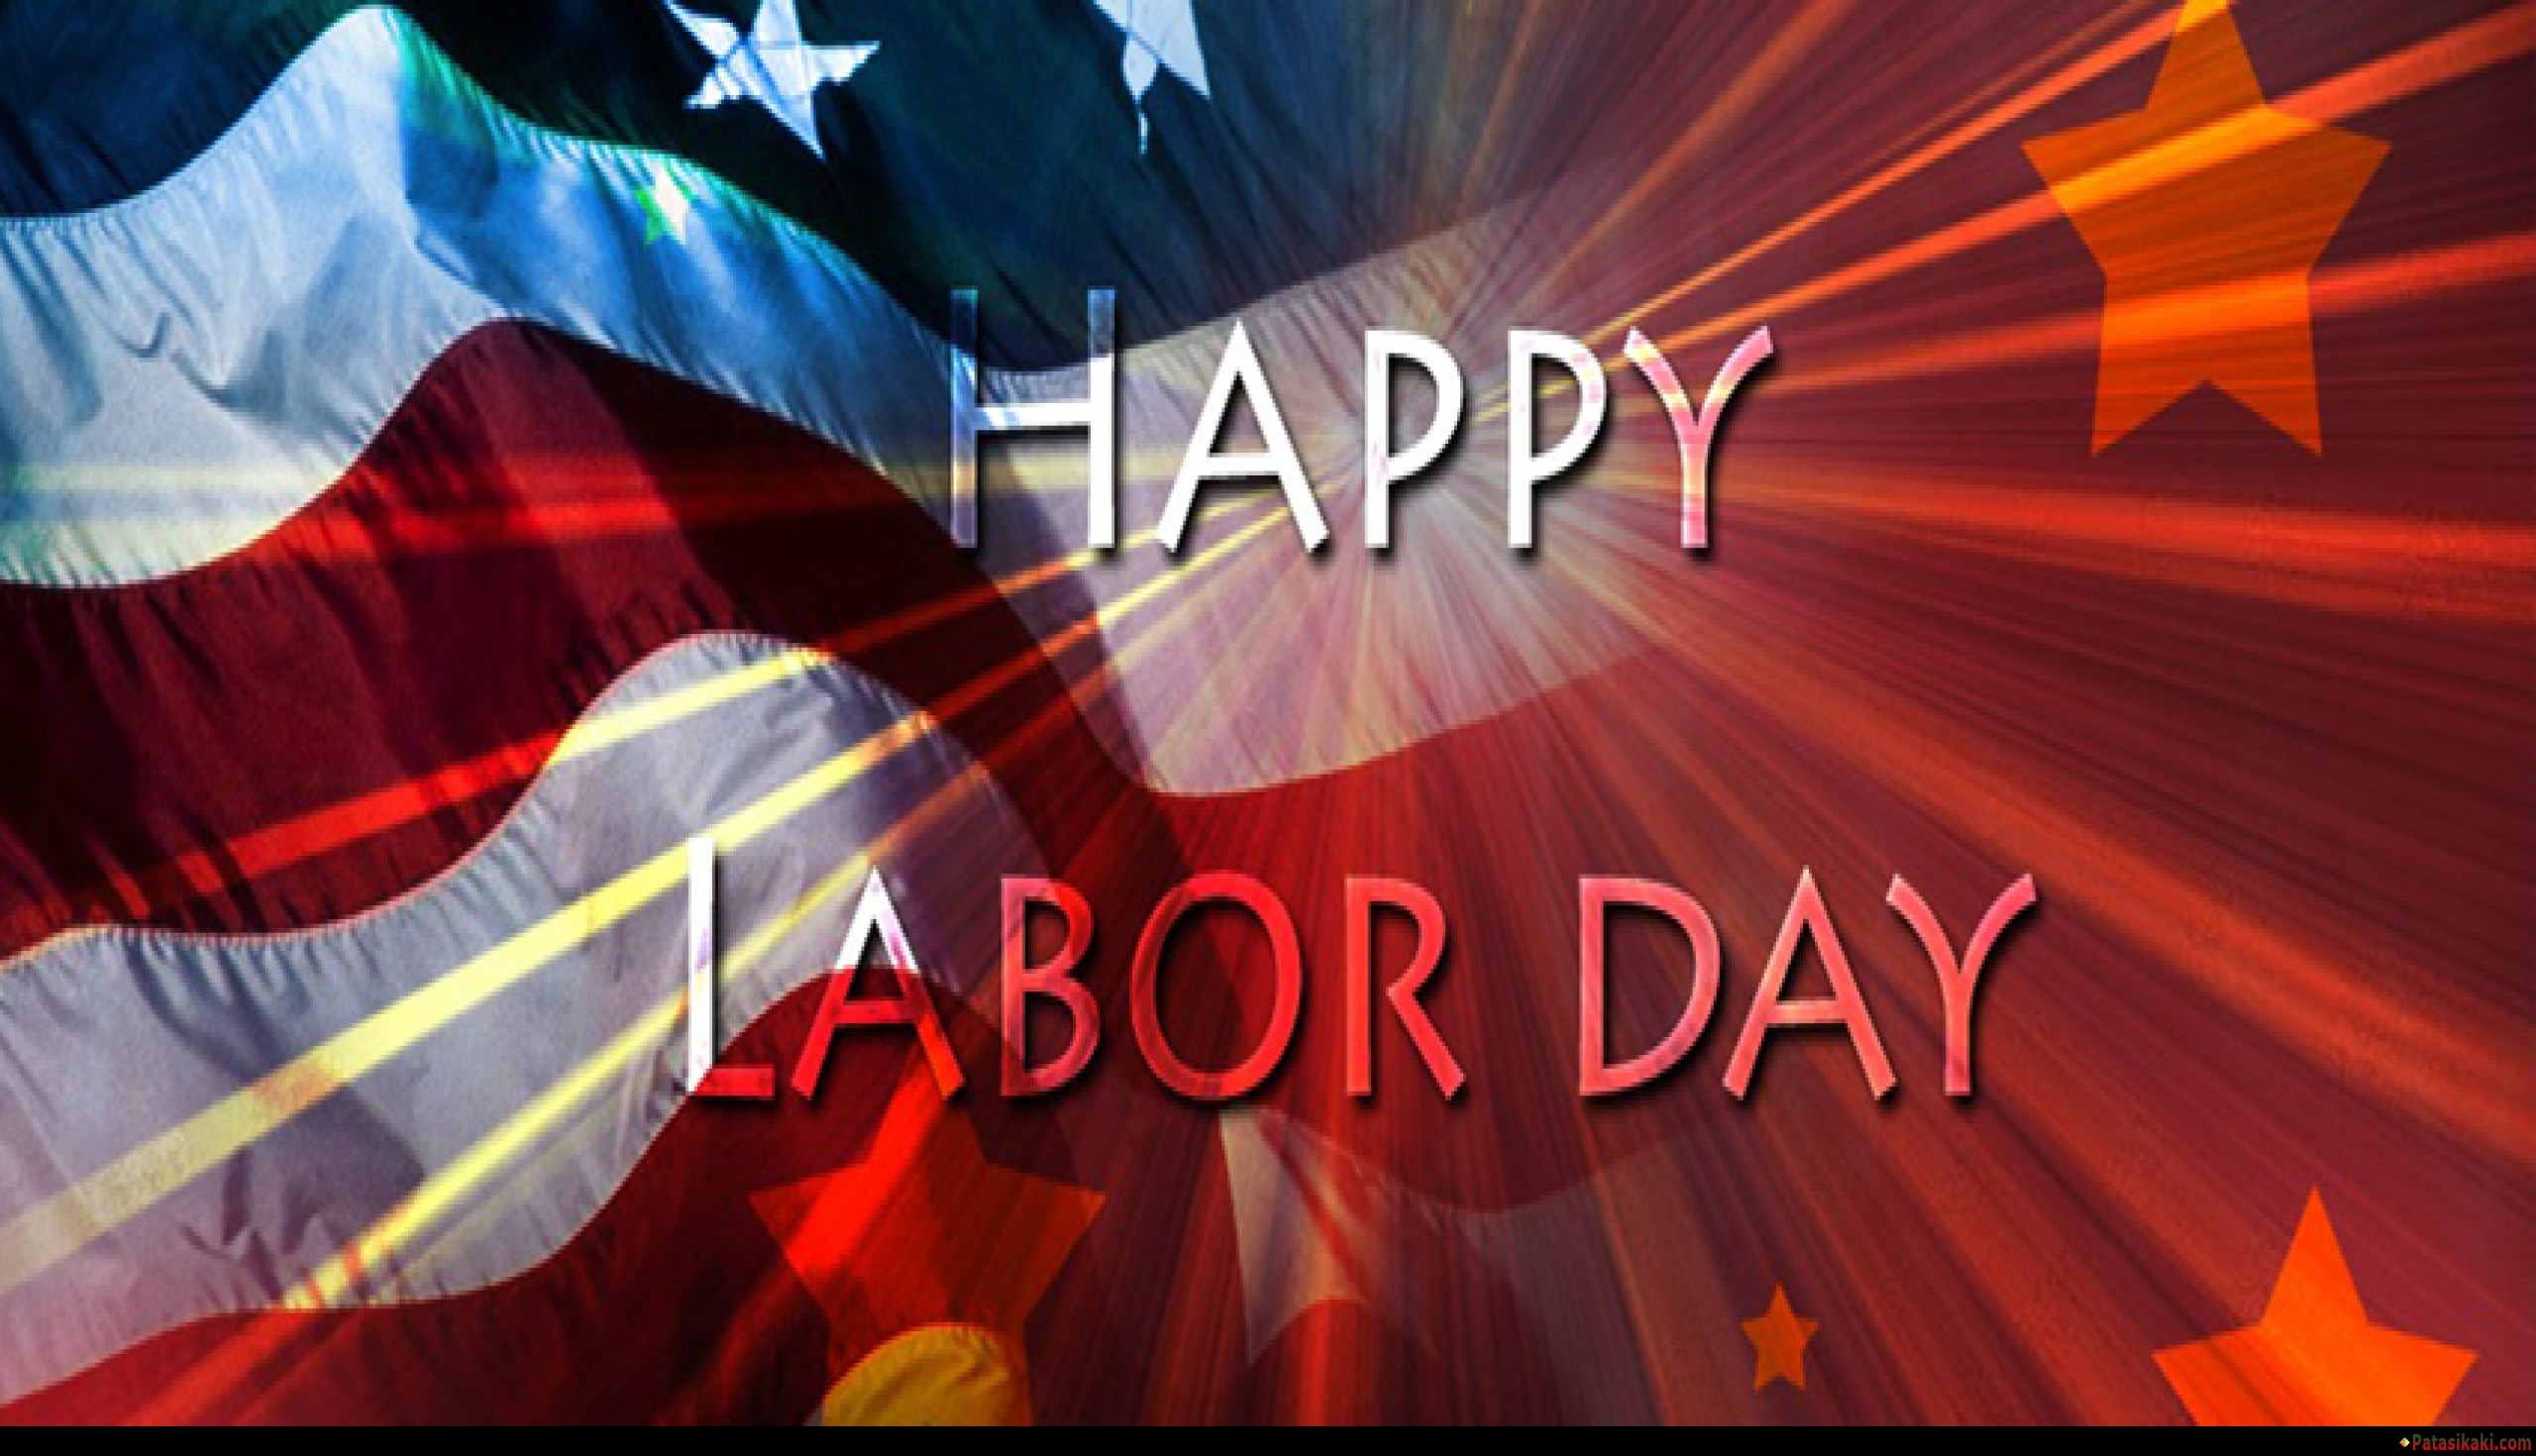 2560x1440 Happy Labor Day America, Download Fastival greetings, HD Desktop Wallpapers,  Best Wishes Message, Latest images, HD Images, High Defination images, ...